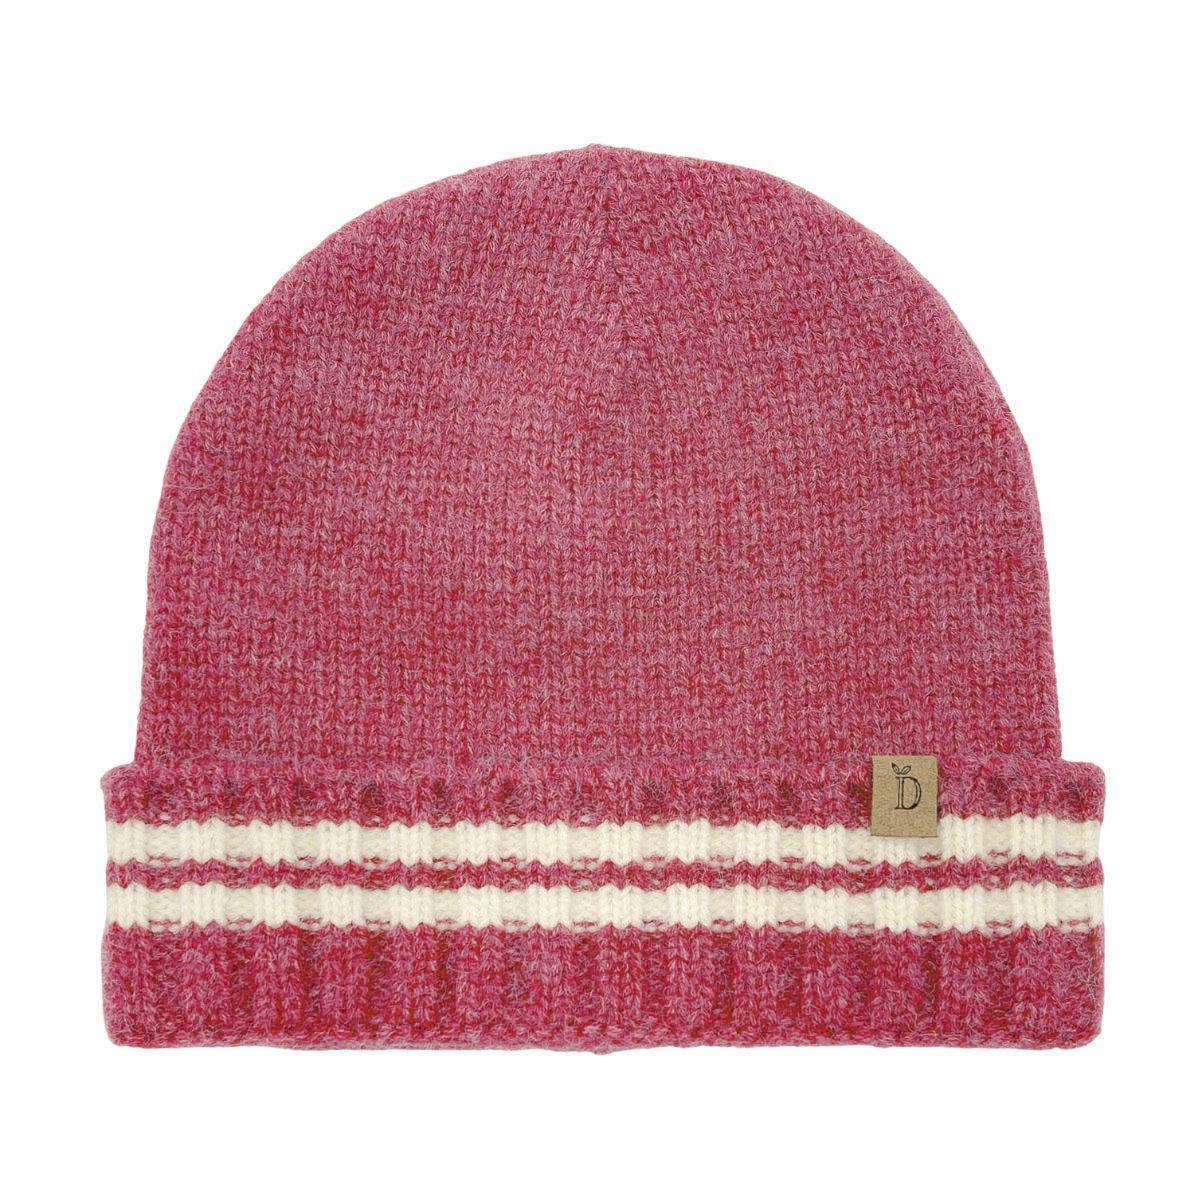 Stay Cozy and Stylish with Our Women's Stripe Knit Beanie